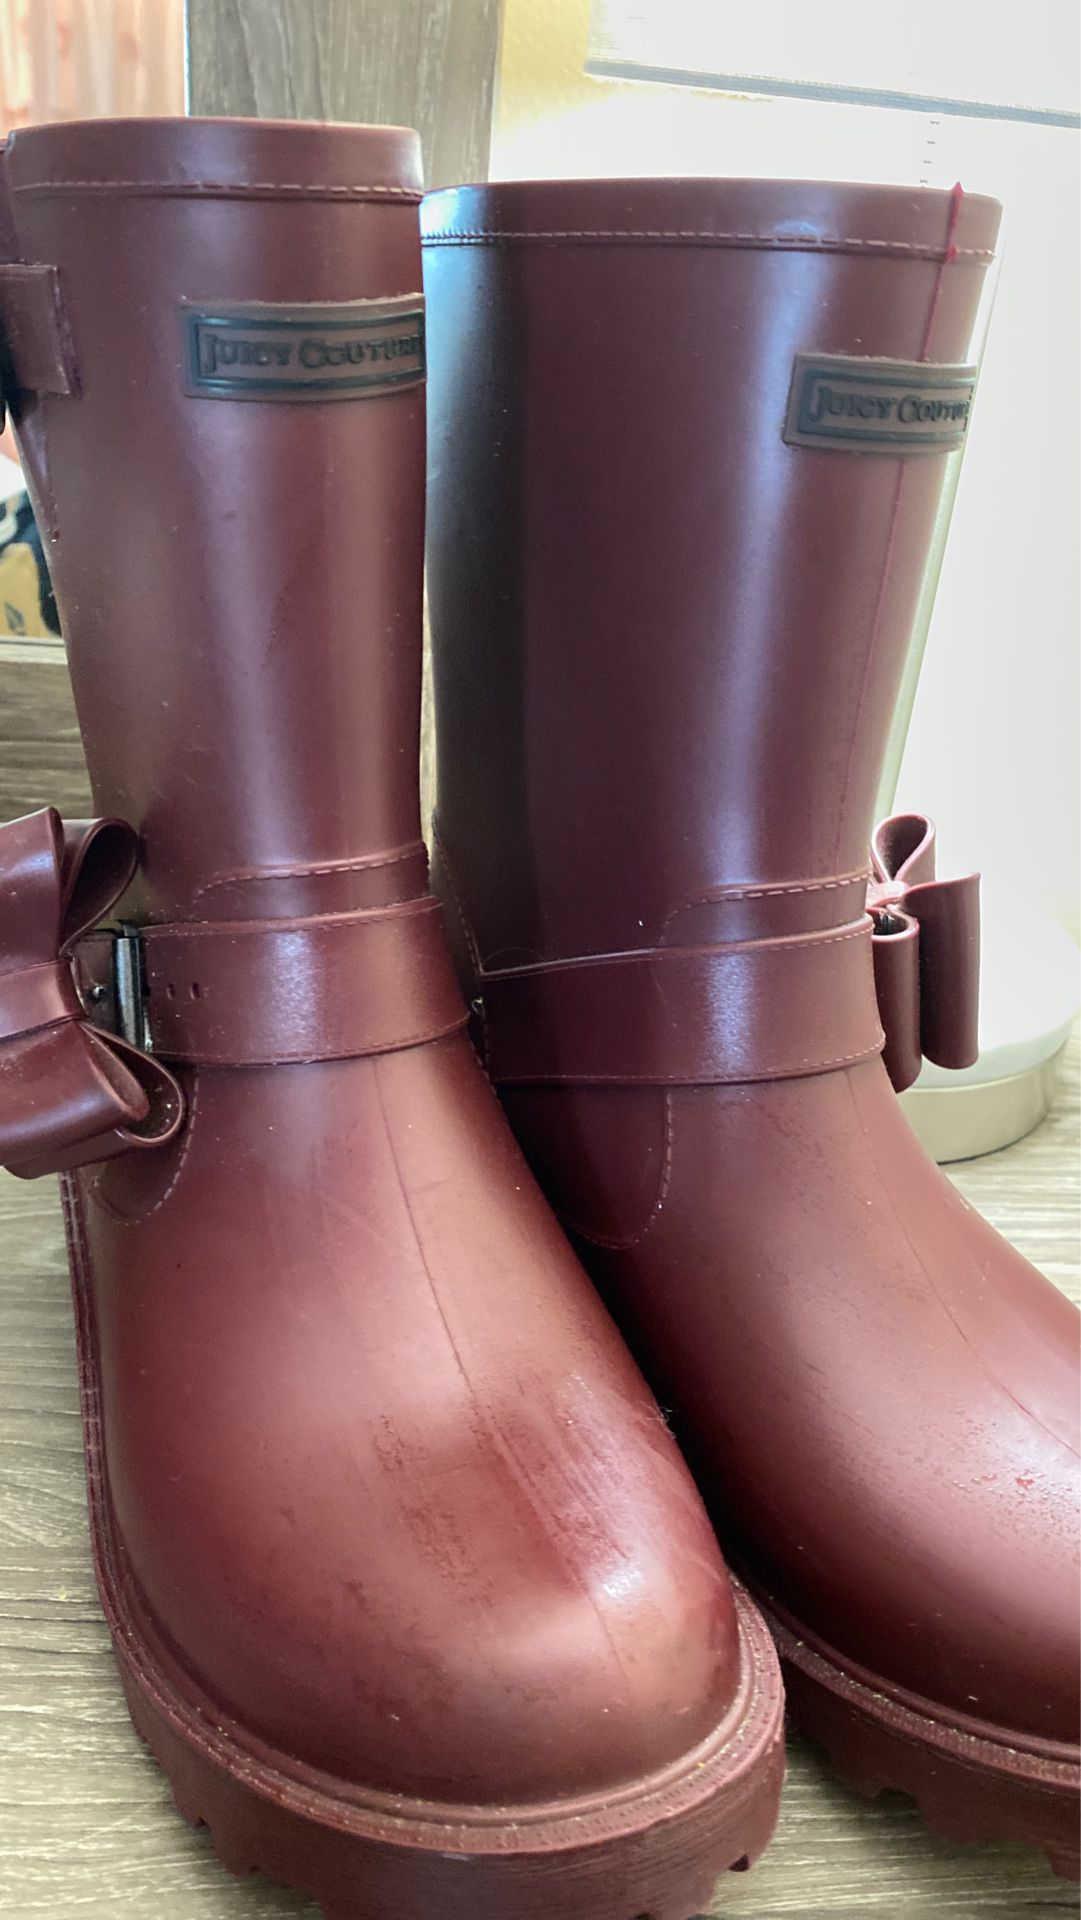 Juicy Couture rain boots